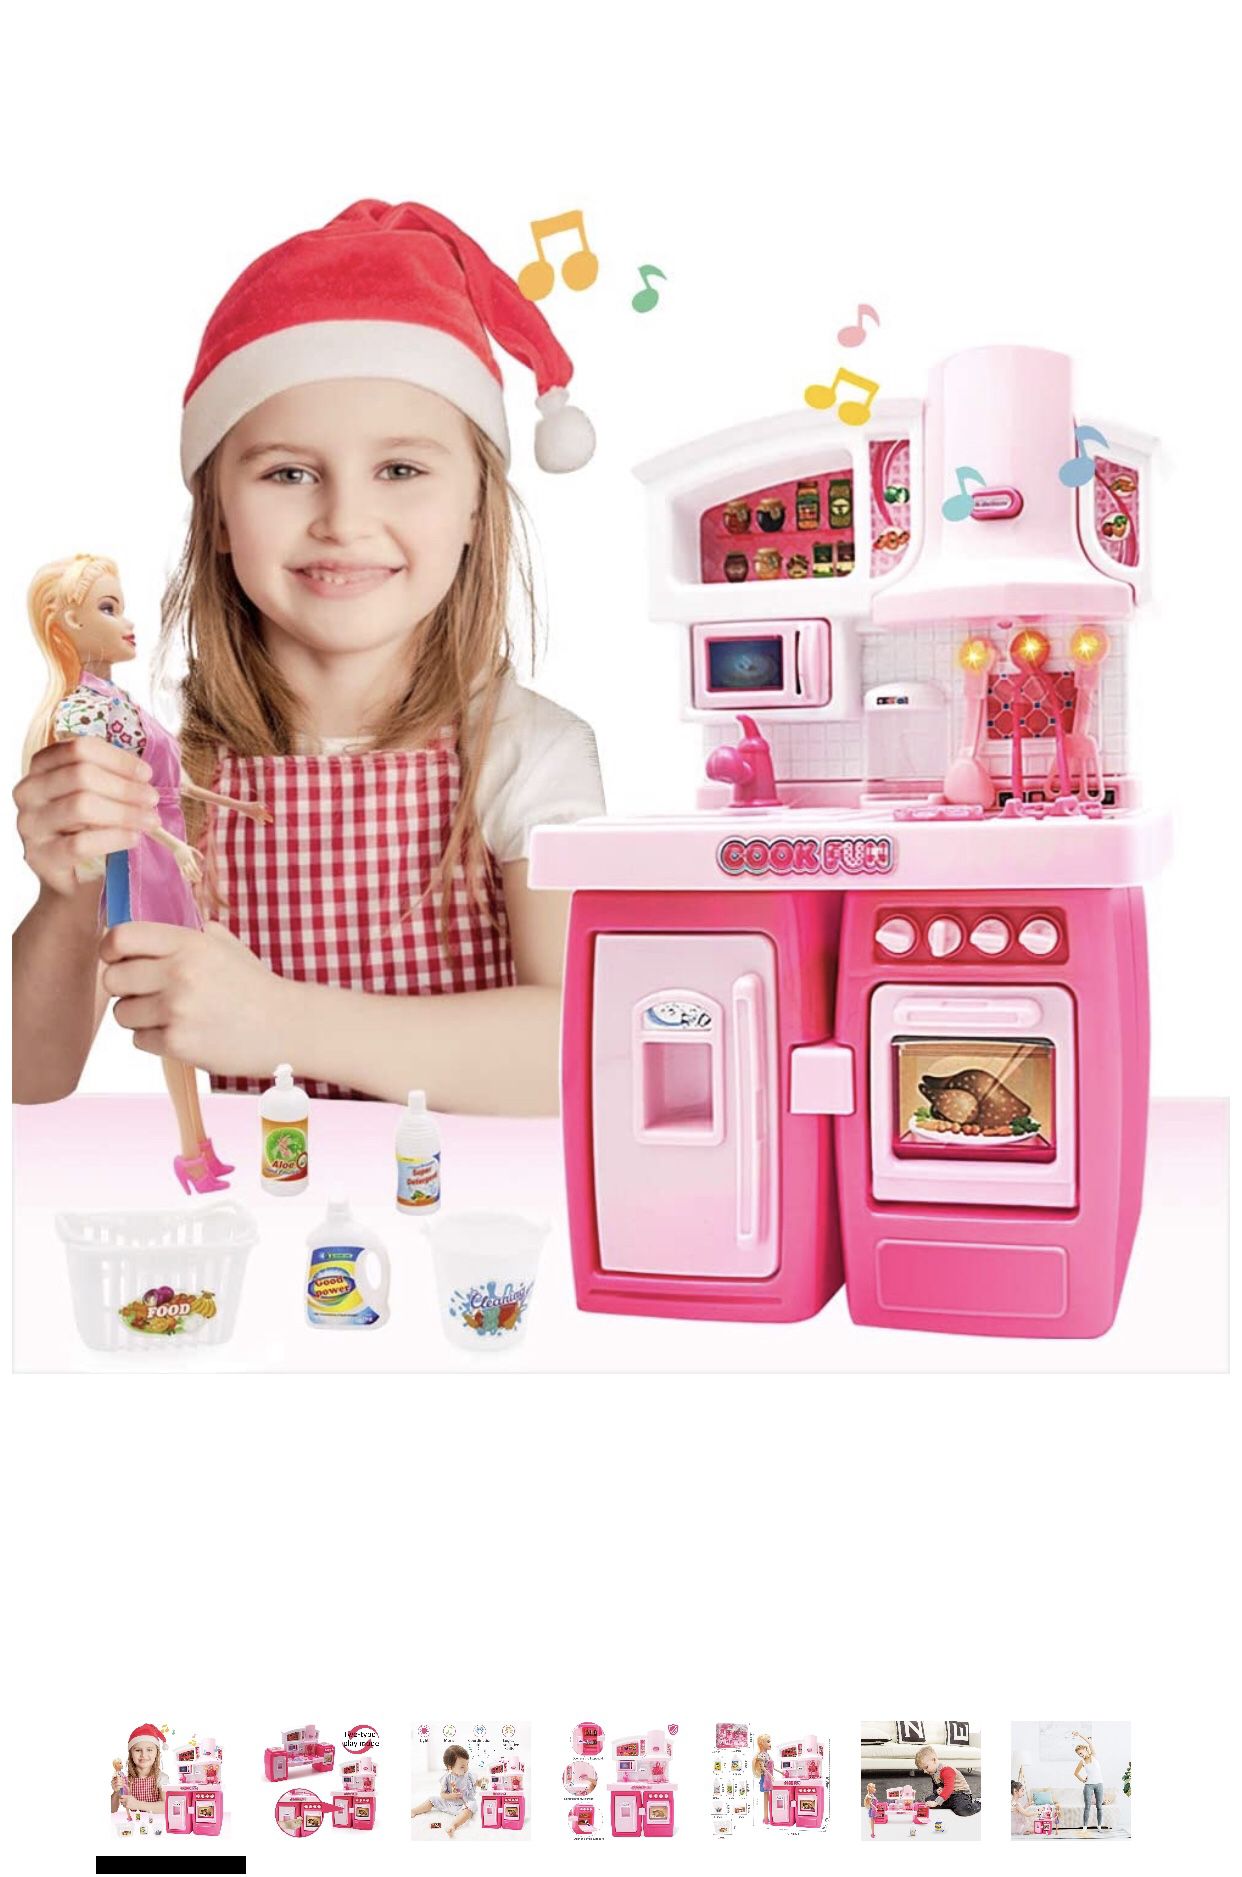 Kitchen Set for Girls Doll House Kitchen Toy Asseccories and Furniture Set with Chef Doll Pull-Out Refrigerator and Microwave Oven Toy Mini Kitchen T